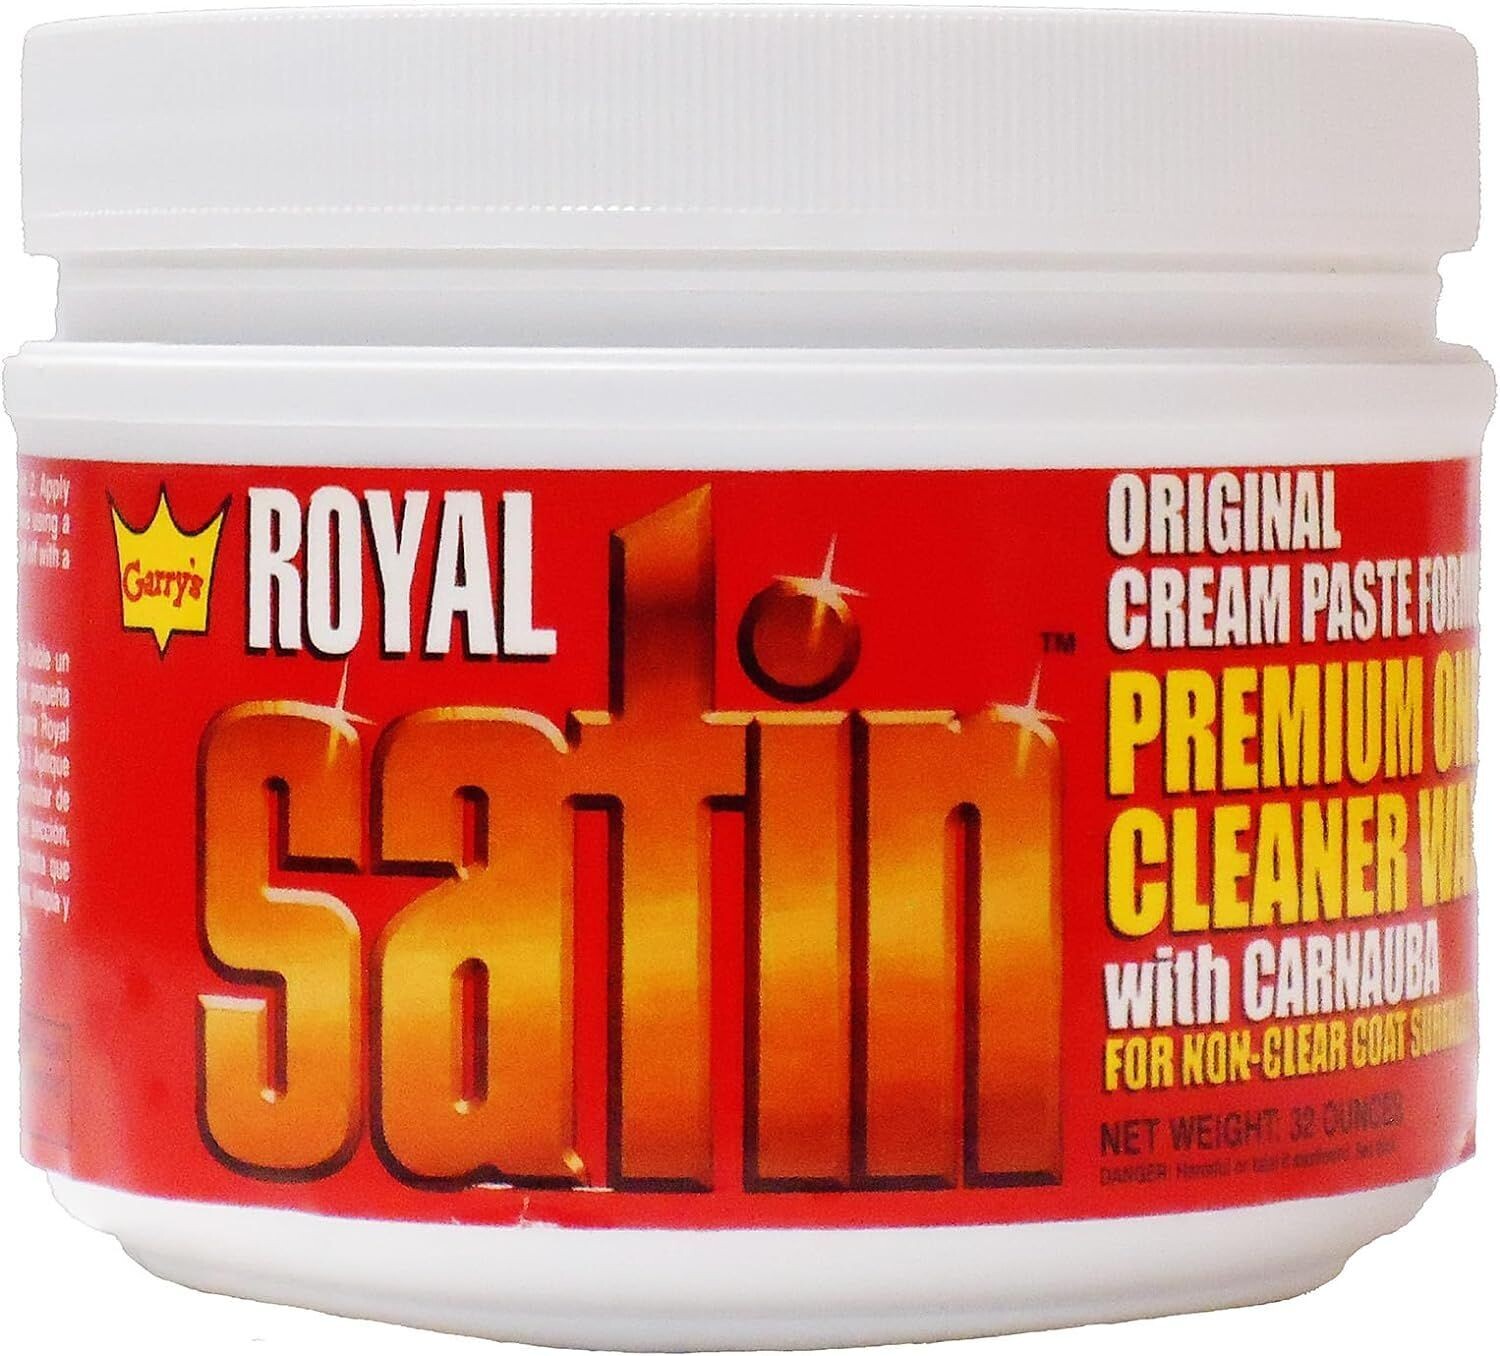 Garry's Royal Satin - One Step Automotive Cleaner Wax - Oxidation Remover and Restoration Wax For Cars, Trucks, & Busses - Ca.